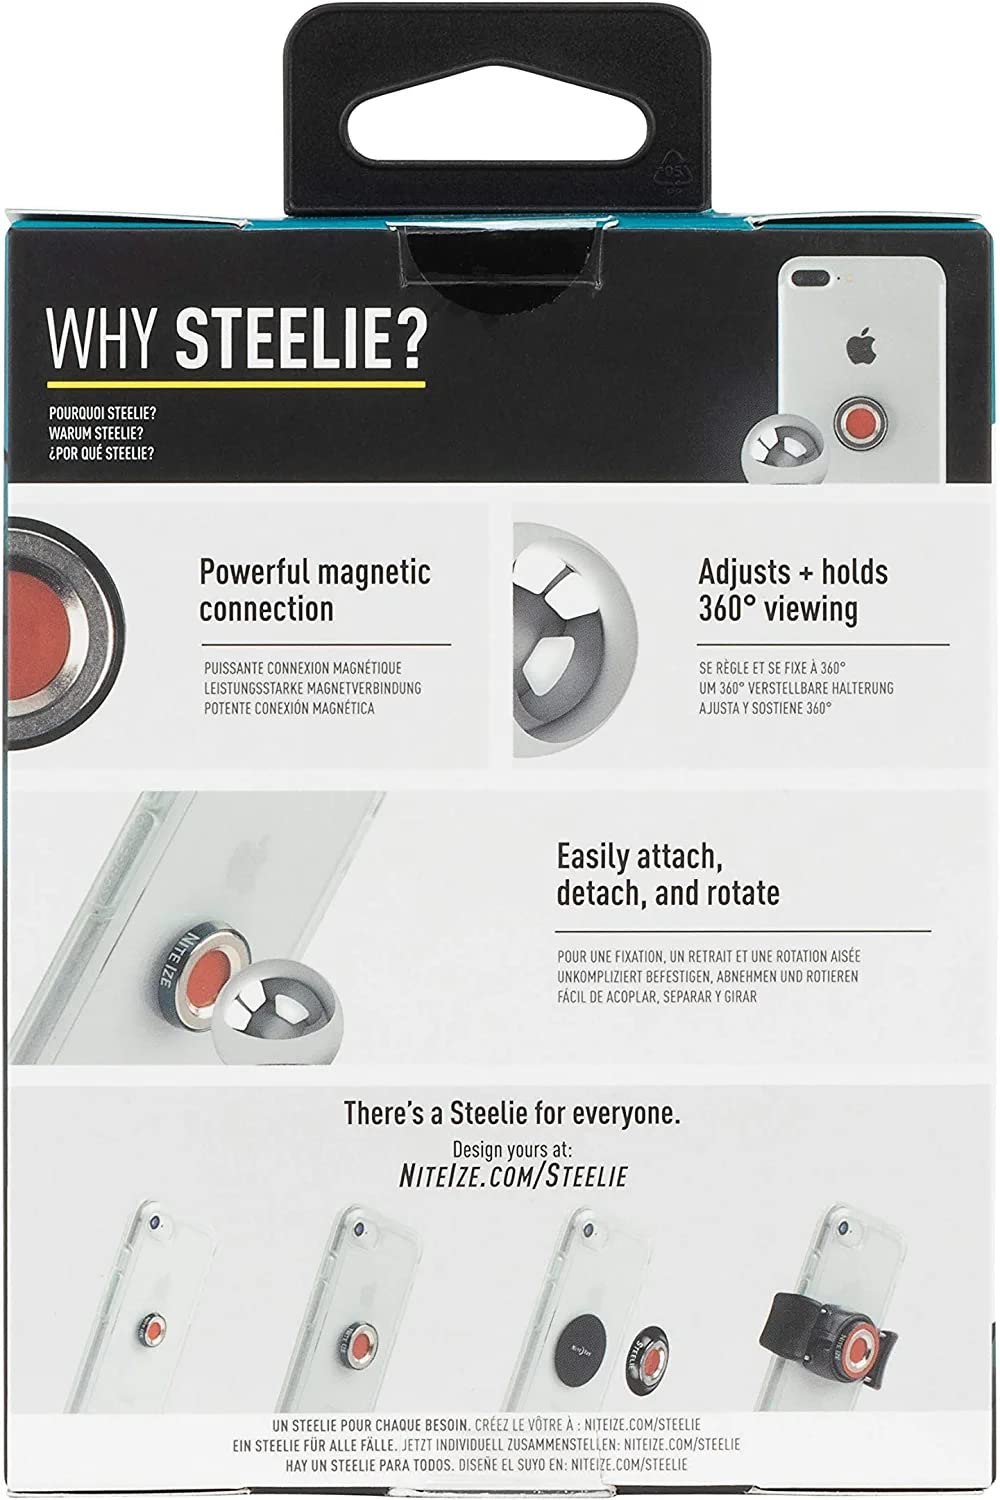 Nite Ize Steelie Orbiter Dash Mount Kit - Magnetic Cell Phone Holder for Car, Low Profile, No Attached Magnets